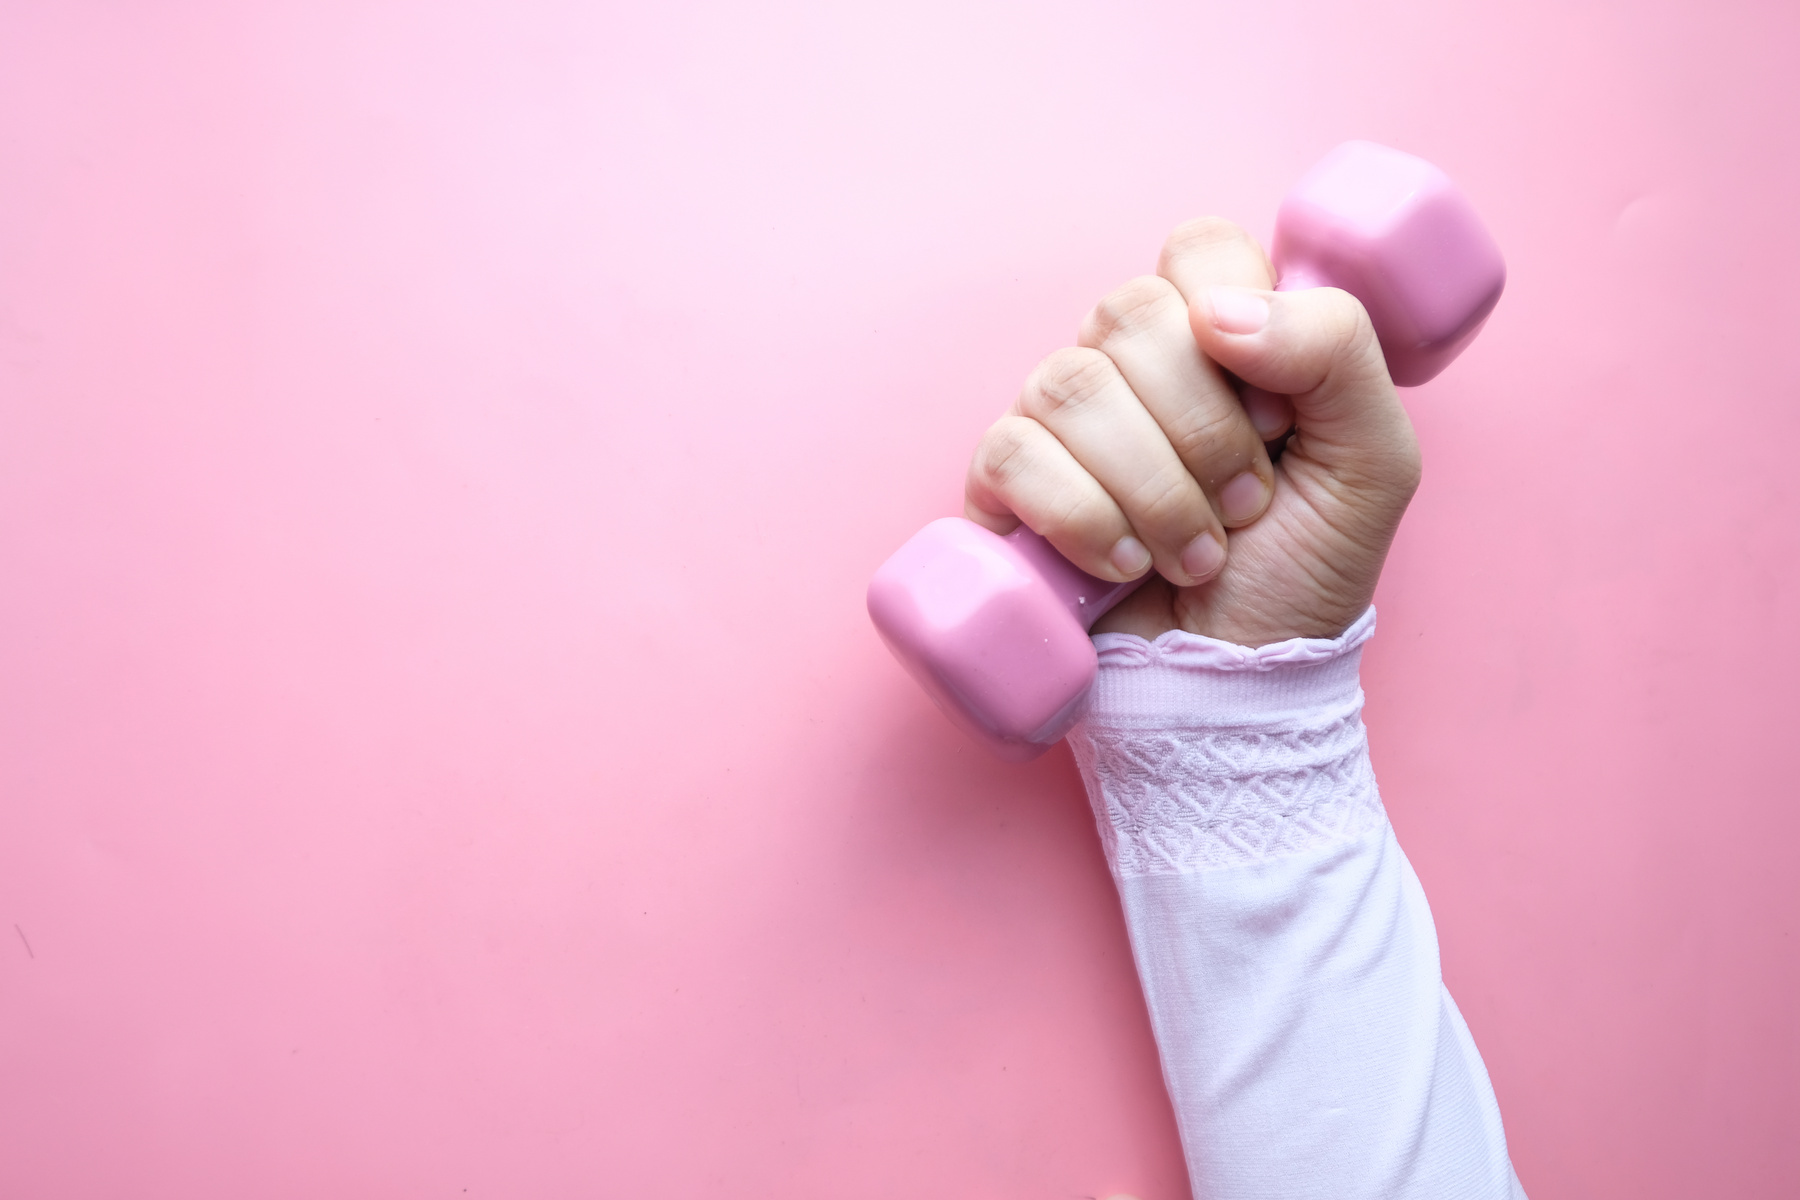 Top View of Woman Hand Holding Pink Dumbbell.